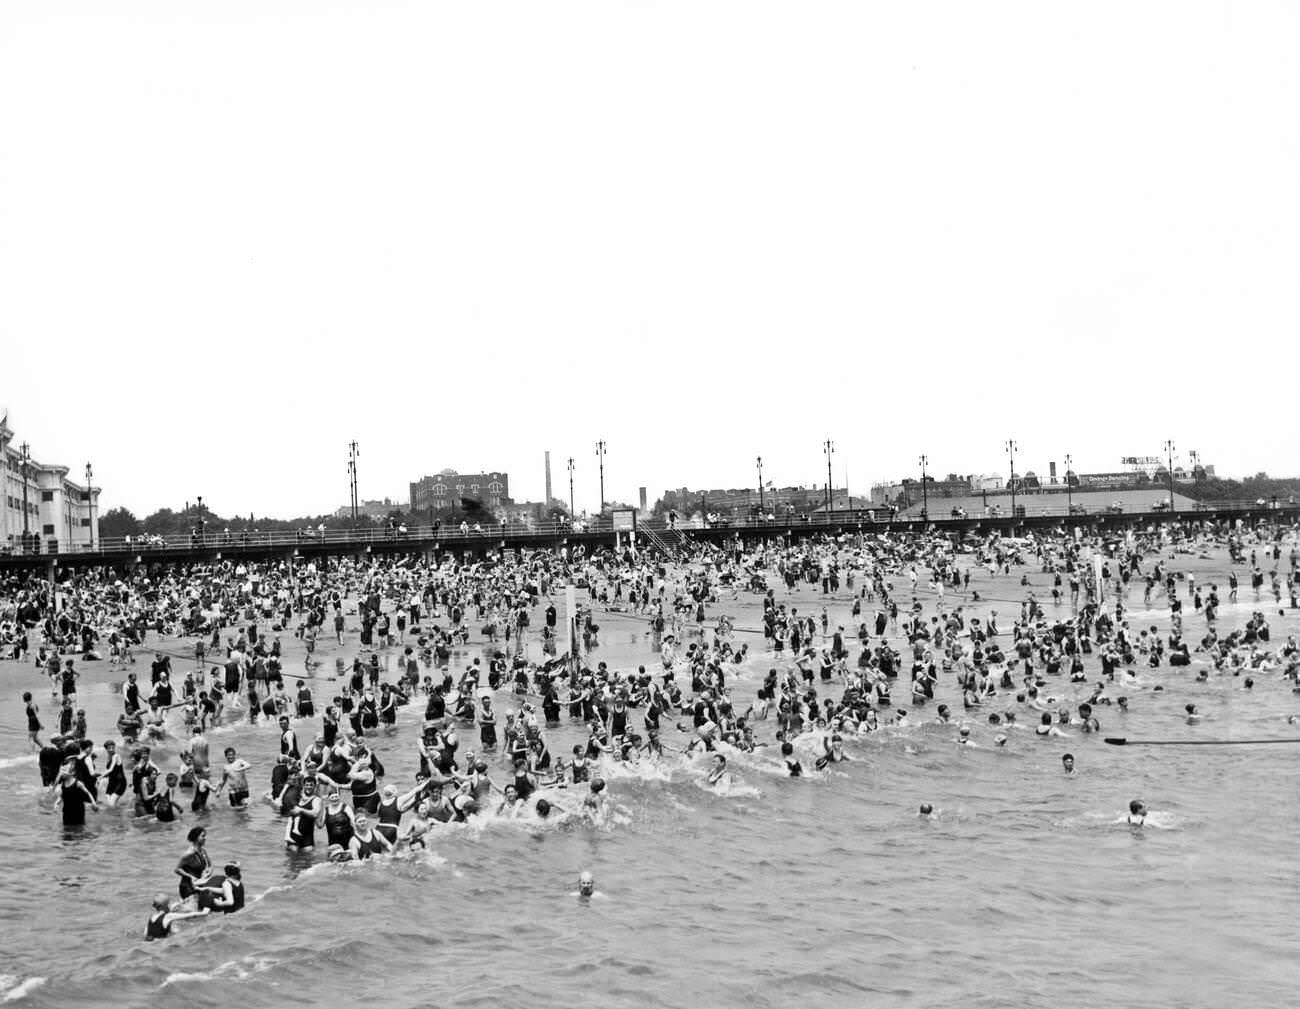 Coney Island Beaches Packed During Heat Wave, Brooklyn, 1927